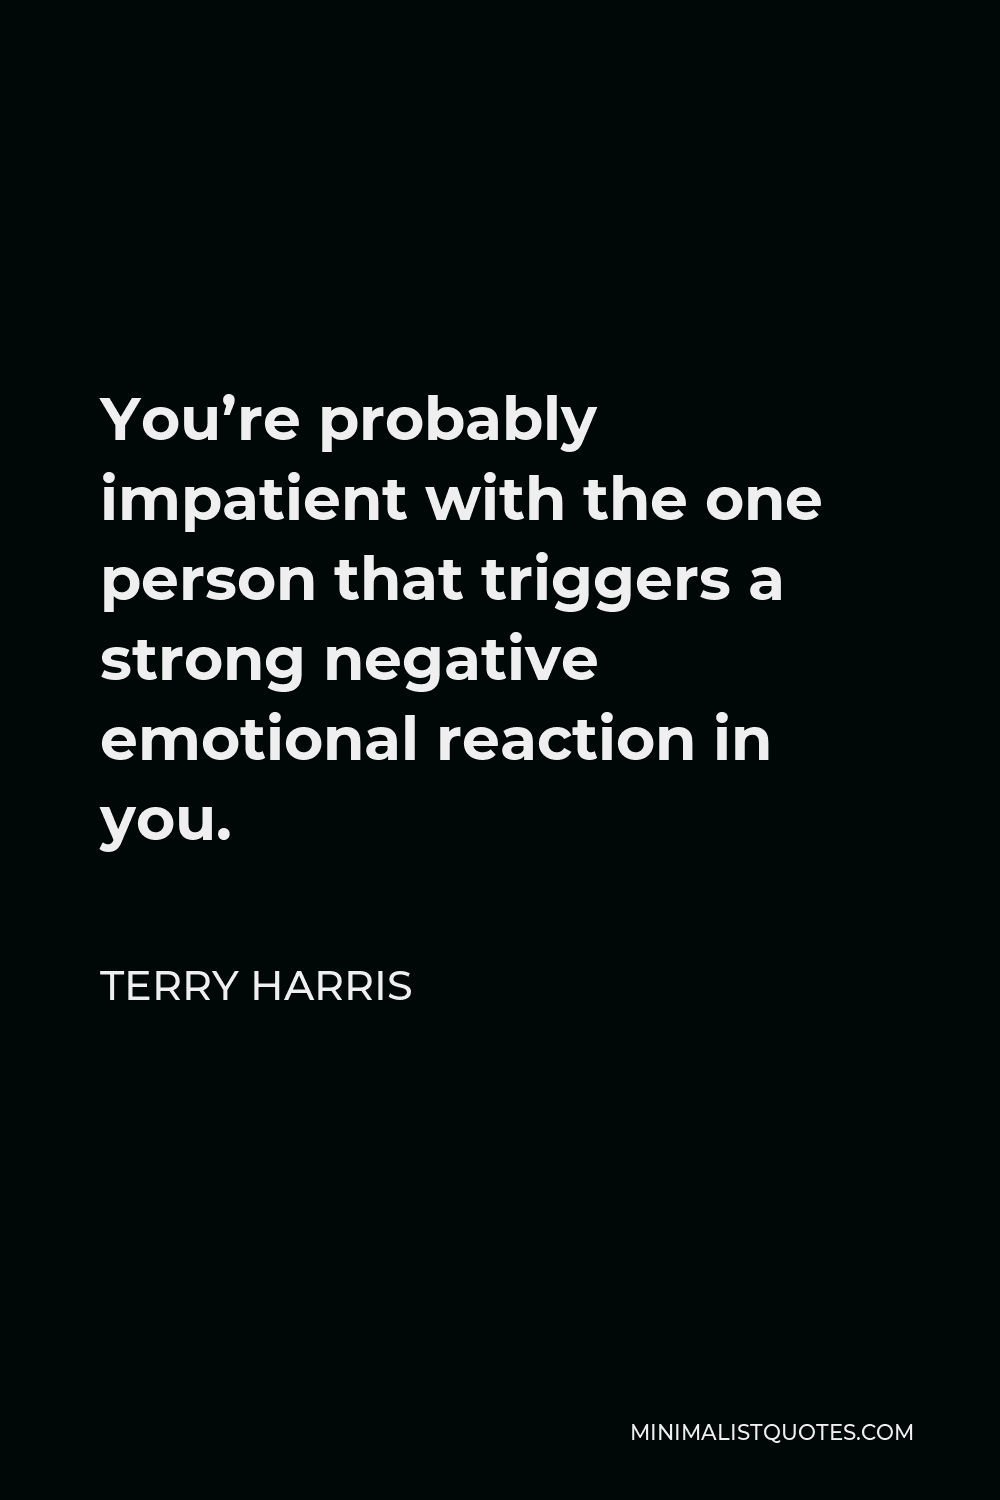 Terry Harris Quote - You’re probably impatient with the one person that triggers a strong negative emotional reaction in you.